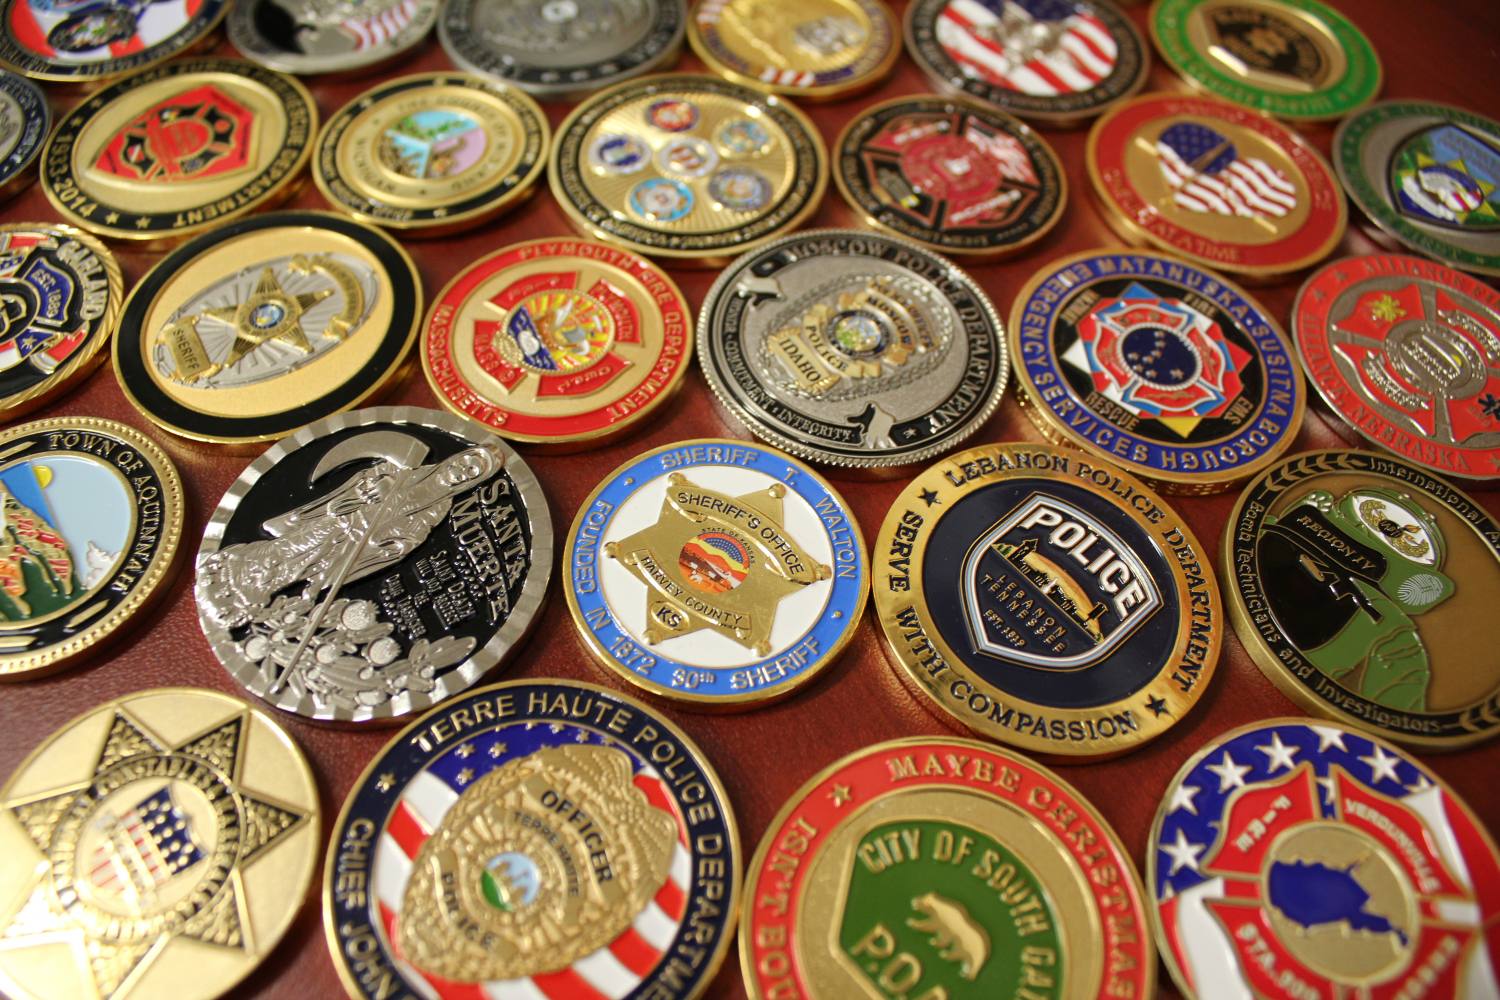 MAJOR DISPLAY: Columbus Police show off patch collections, challenge coins